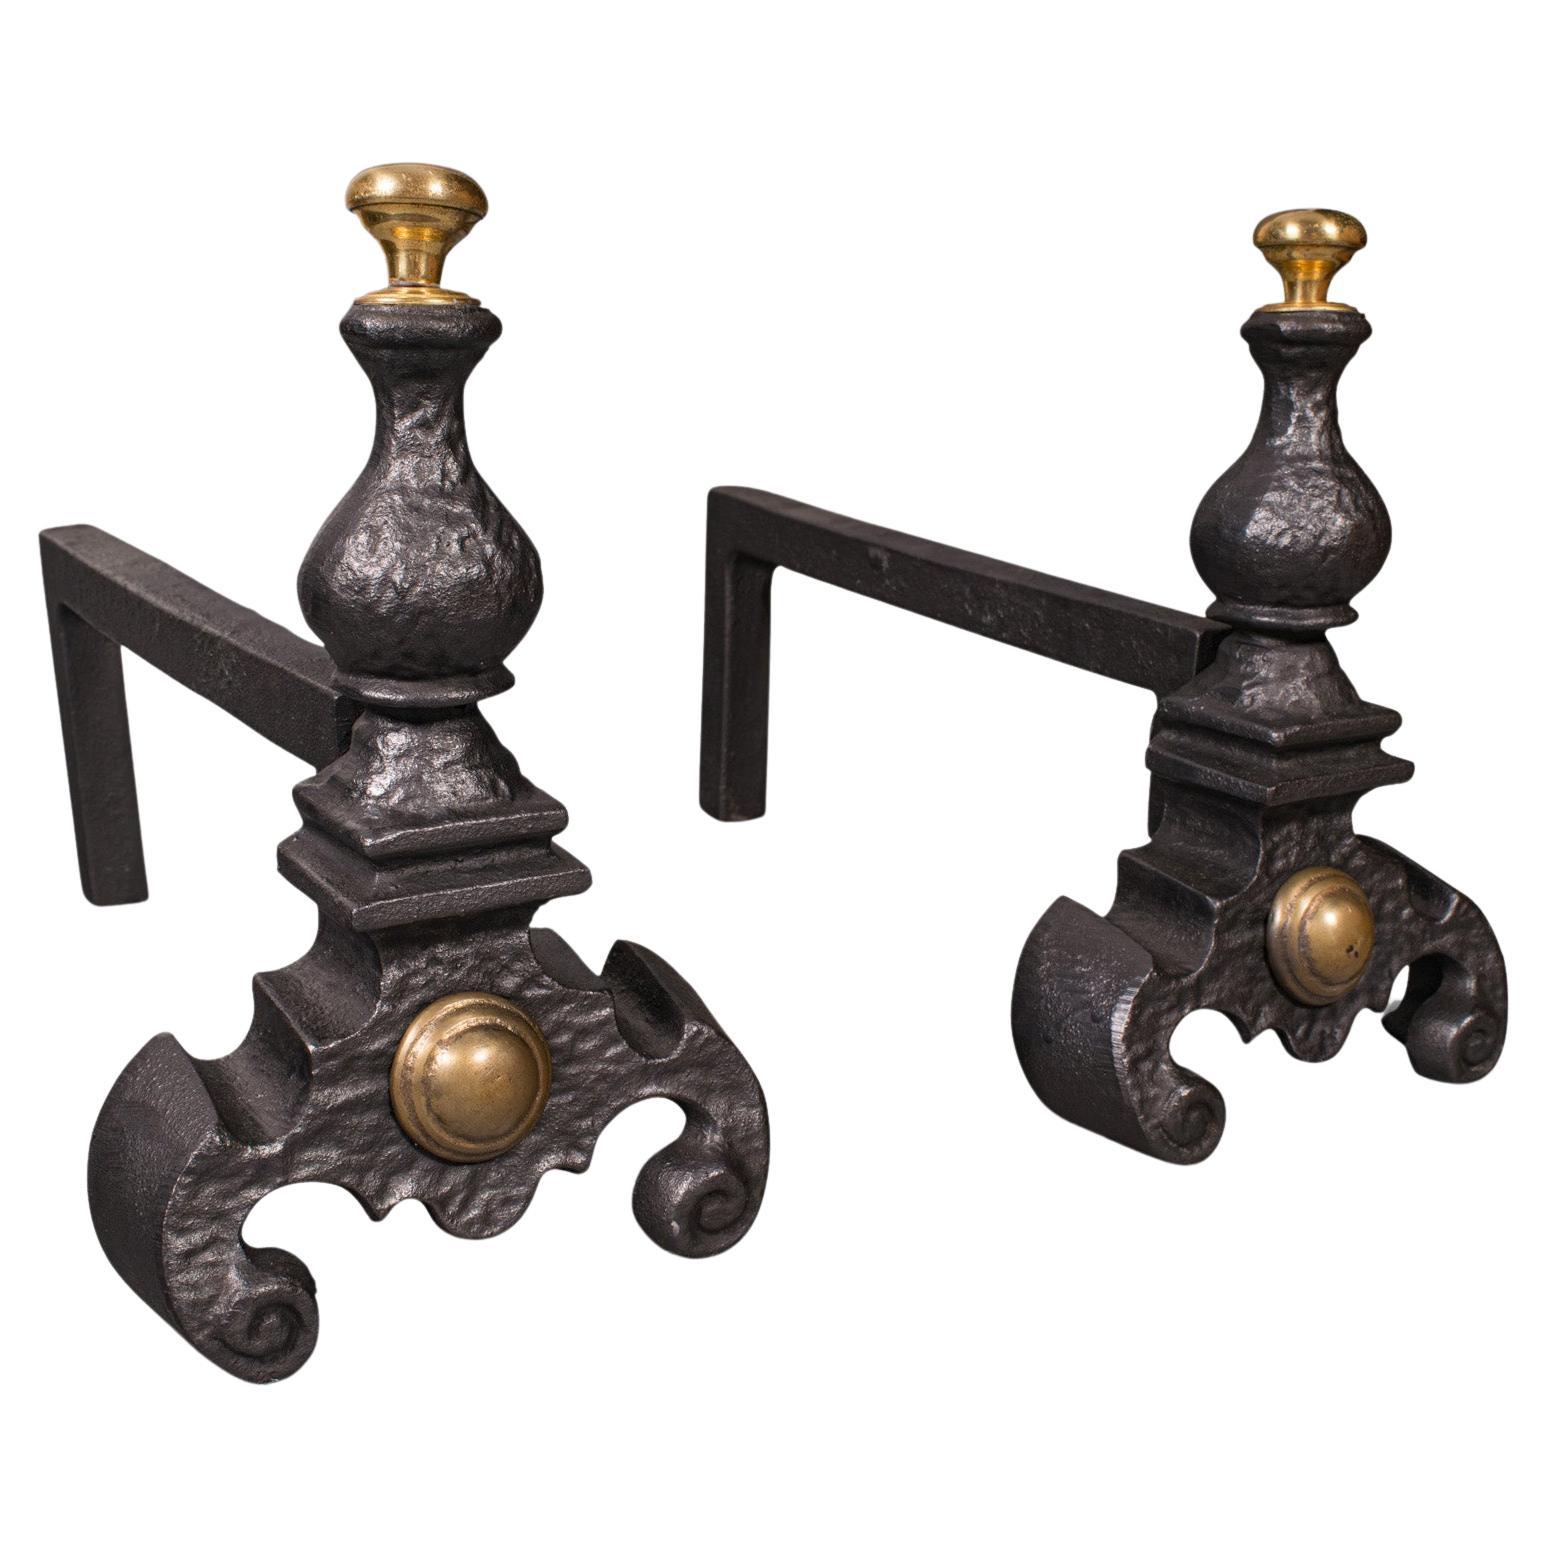 Pair Of Antique Decorative Fire Rests, English Fireside Andiron, Victorian, 1850 For Sale